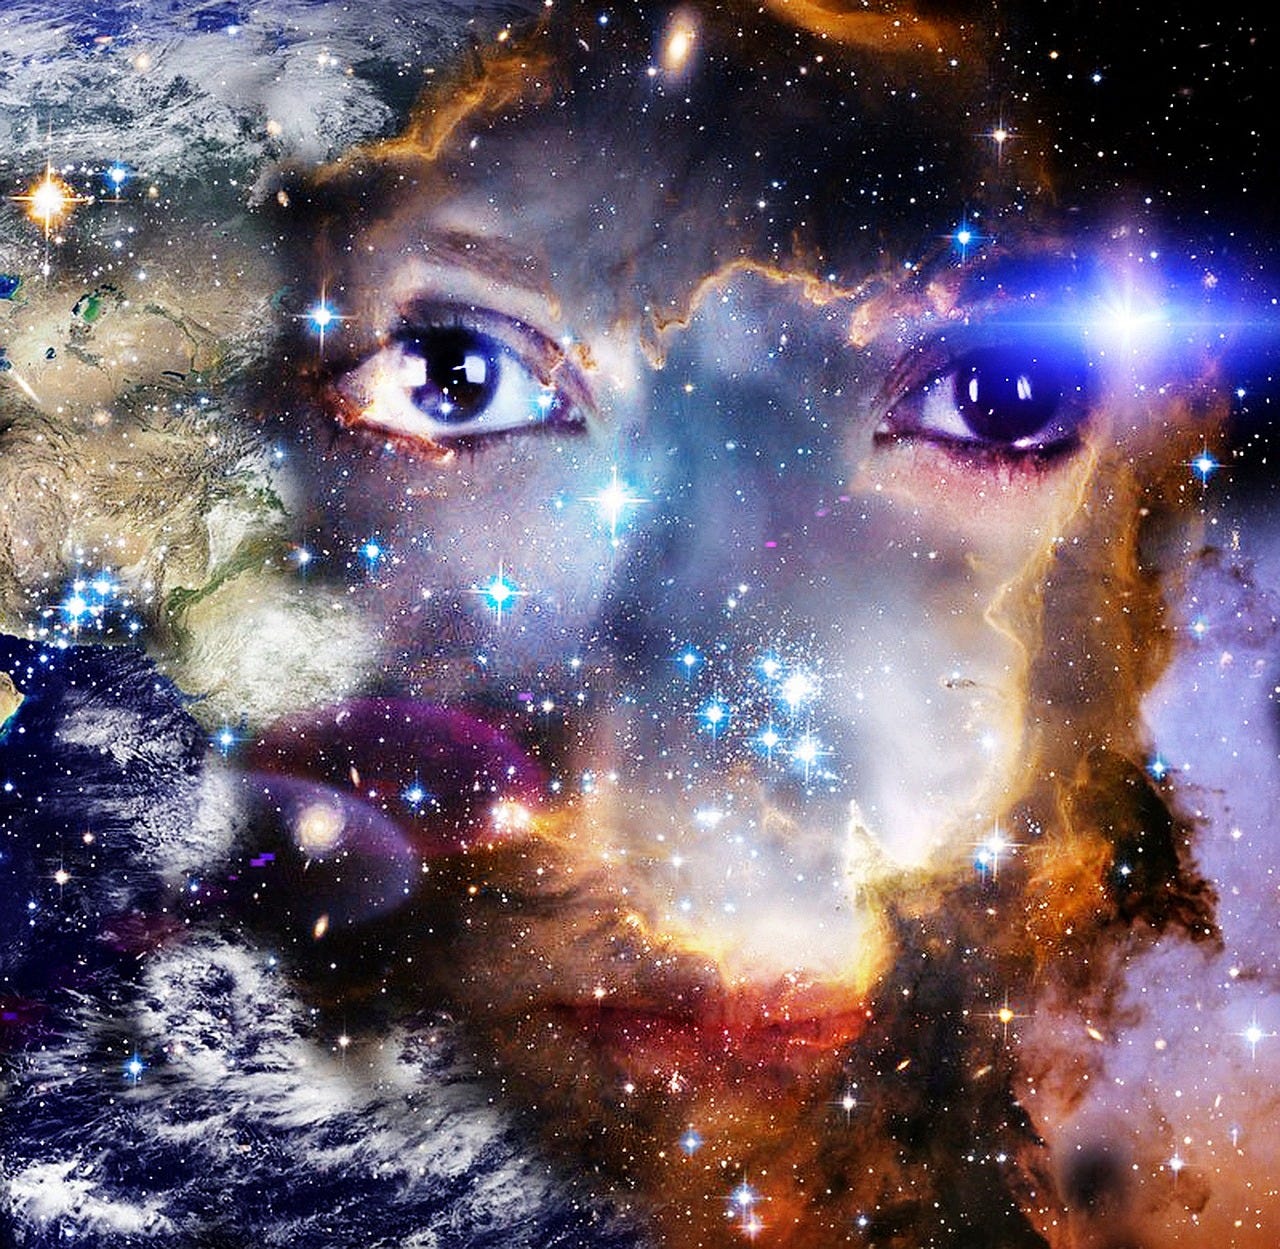 3 Signs You're About to Transcend Into A Whole New Dimension